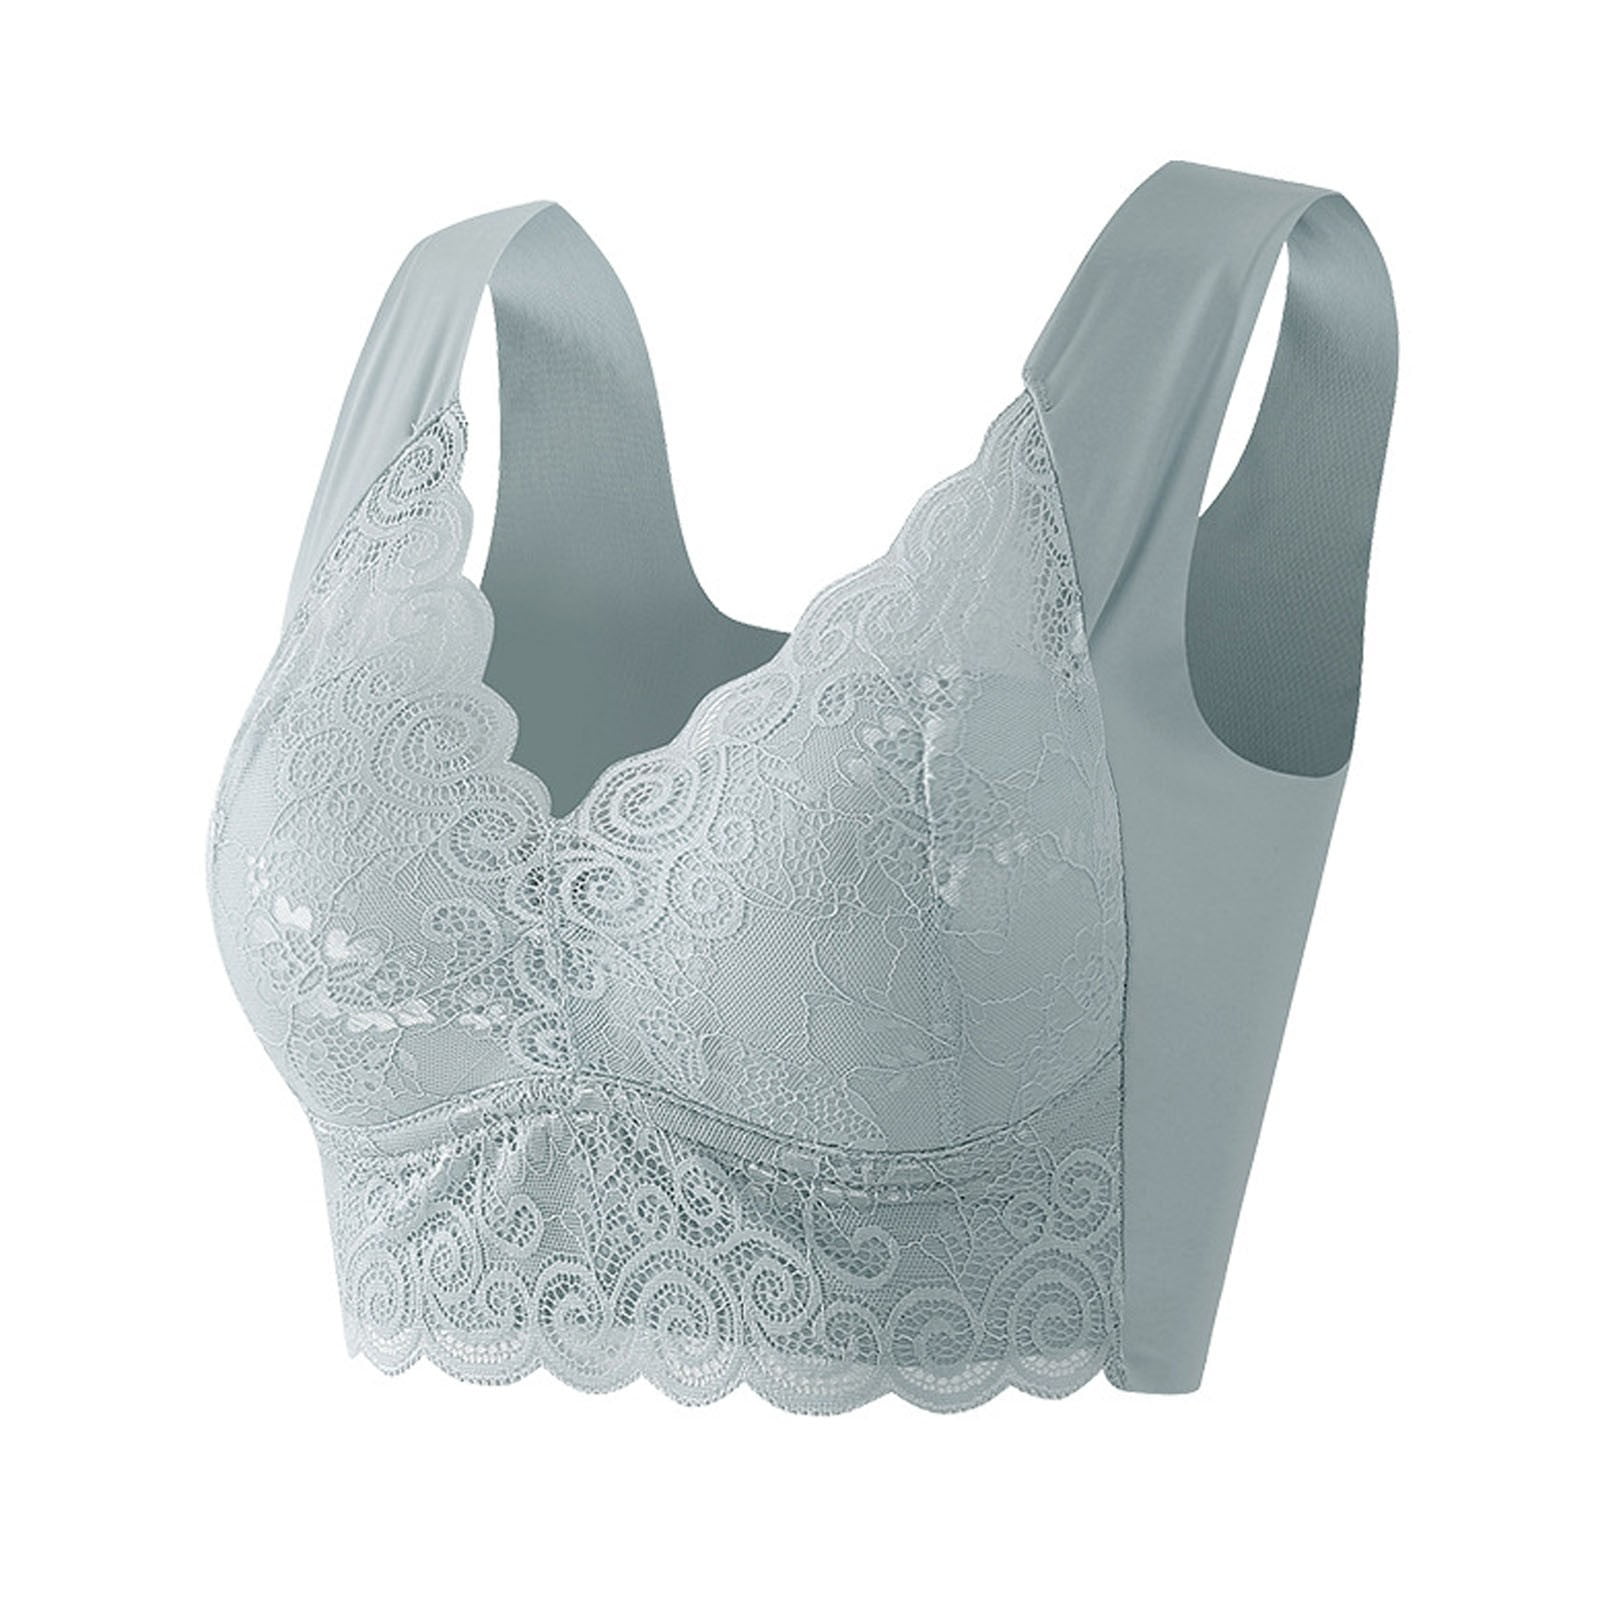 TQWQT Pure Comfort Lace Bralette, Padded Wireless Bra, Convertible Longline  Halter Bralette with Soft Foam Cups